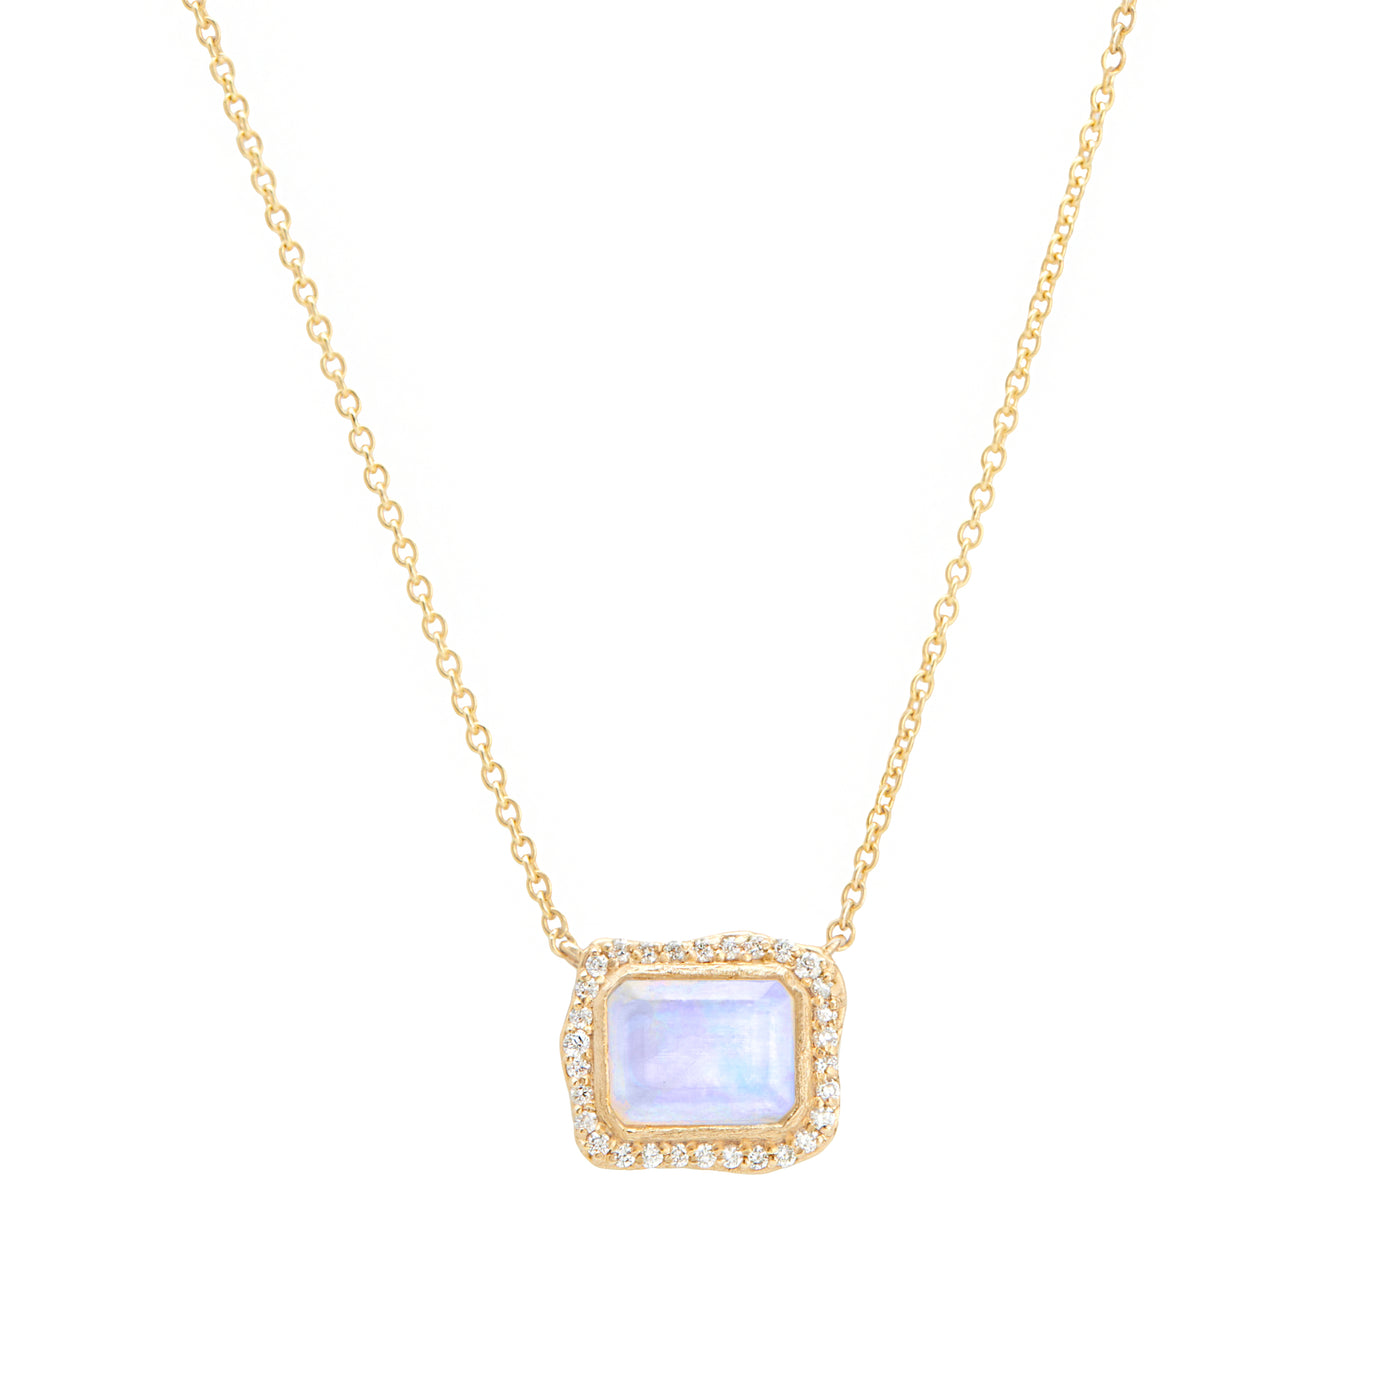 14 Karat Yellow Gold Necklace with Rectangle Shaped Moonstone Stone with Halo of White Diamonds Against White Background